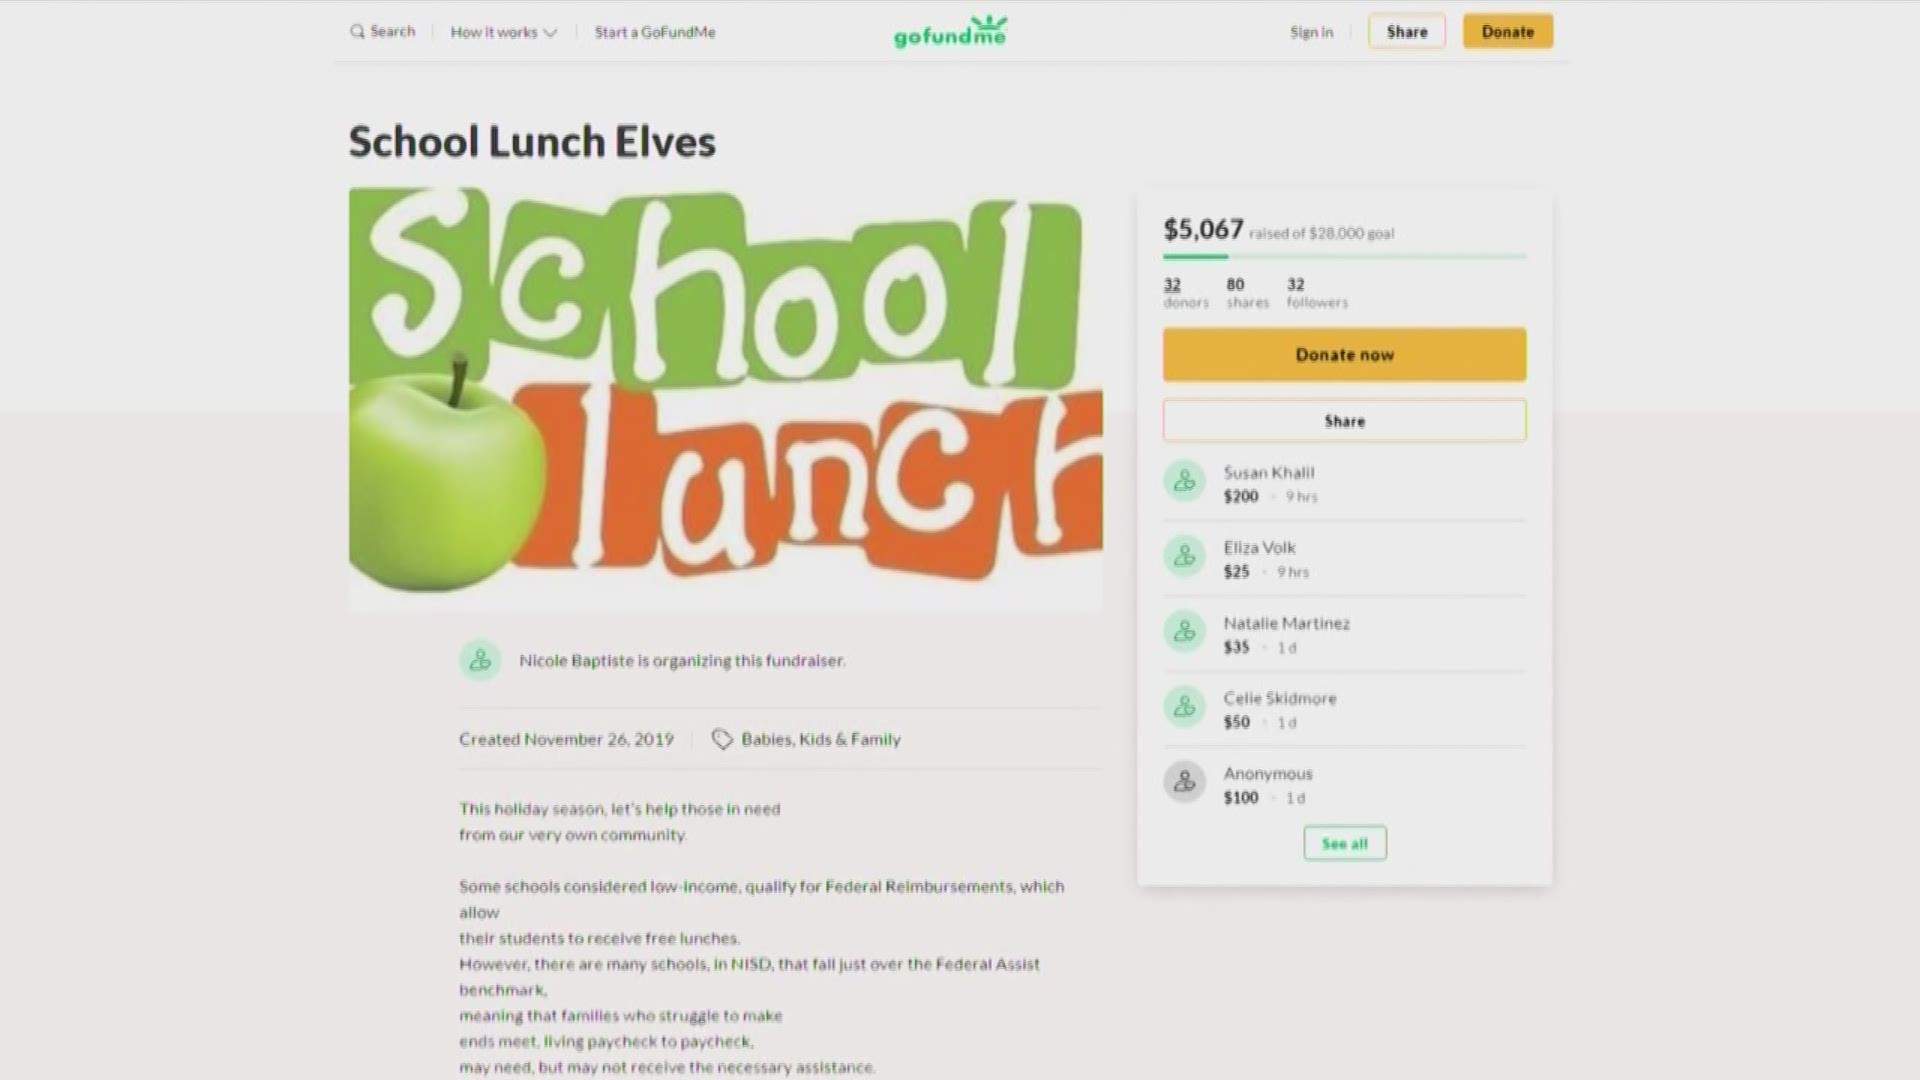 This community member started a GoFundMe page with the hope of raising $28,000 to clear the negative lunch balances of NISD students.